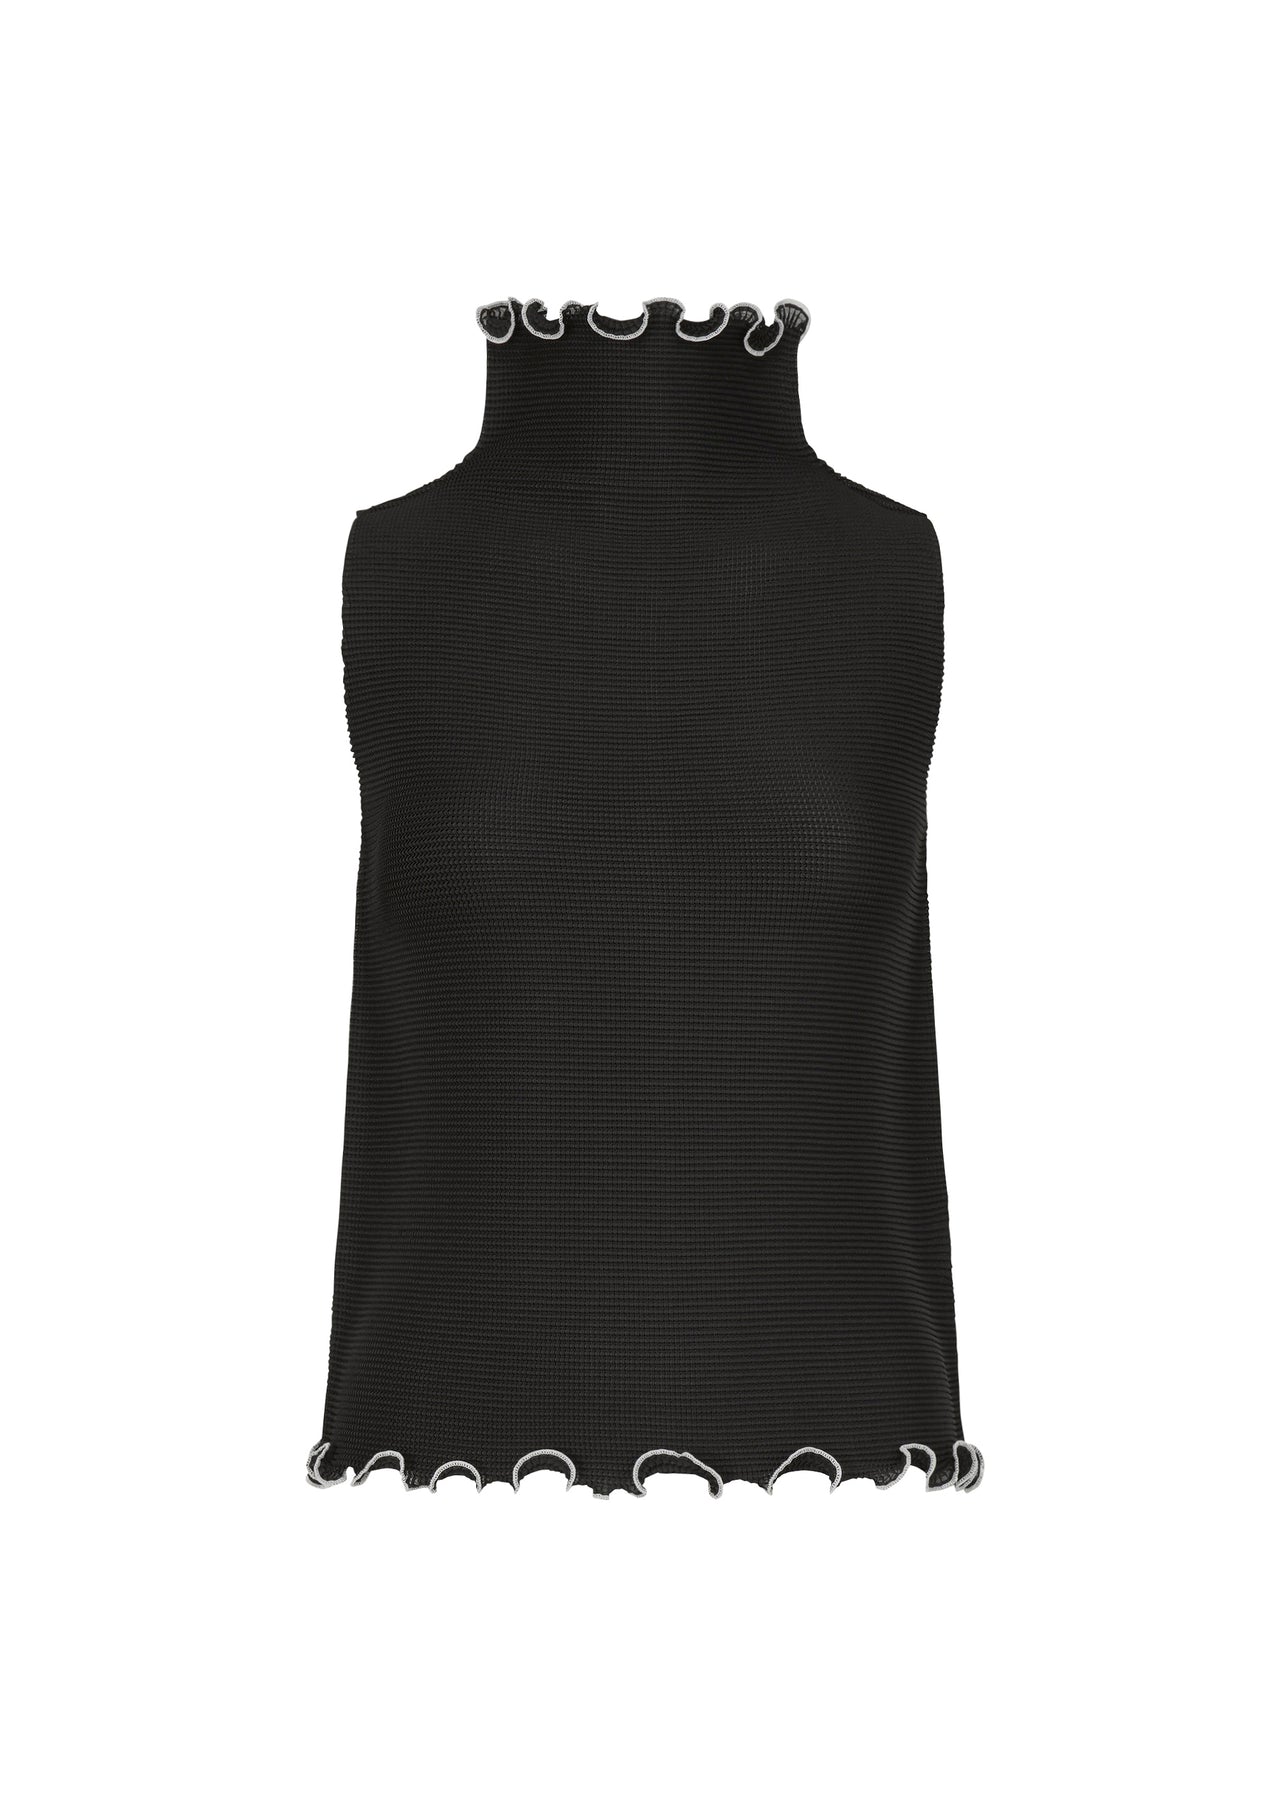 MELLOW STRETCH PLEATS TANK TOP | The official ISSEY MIYAKE ONLINE